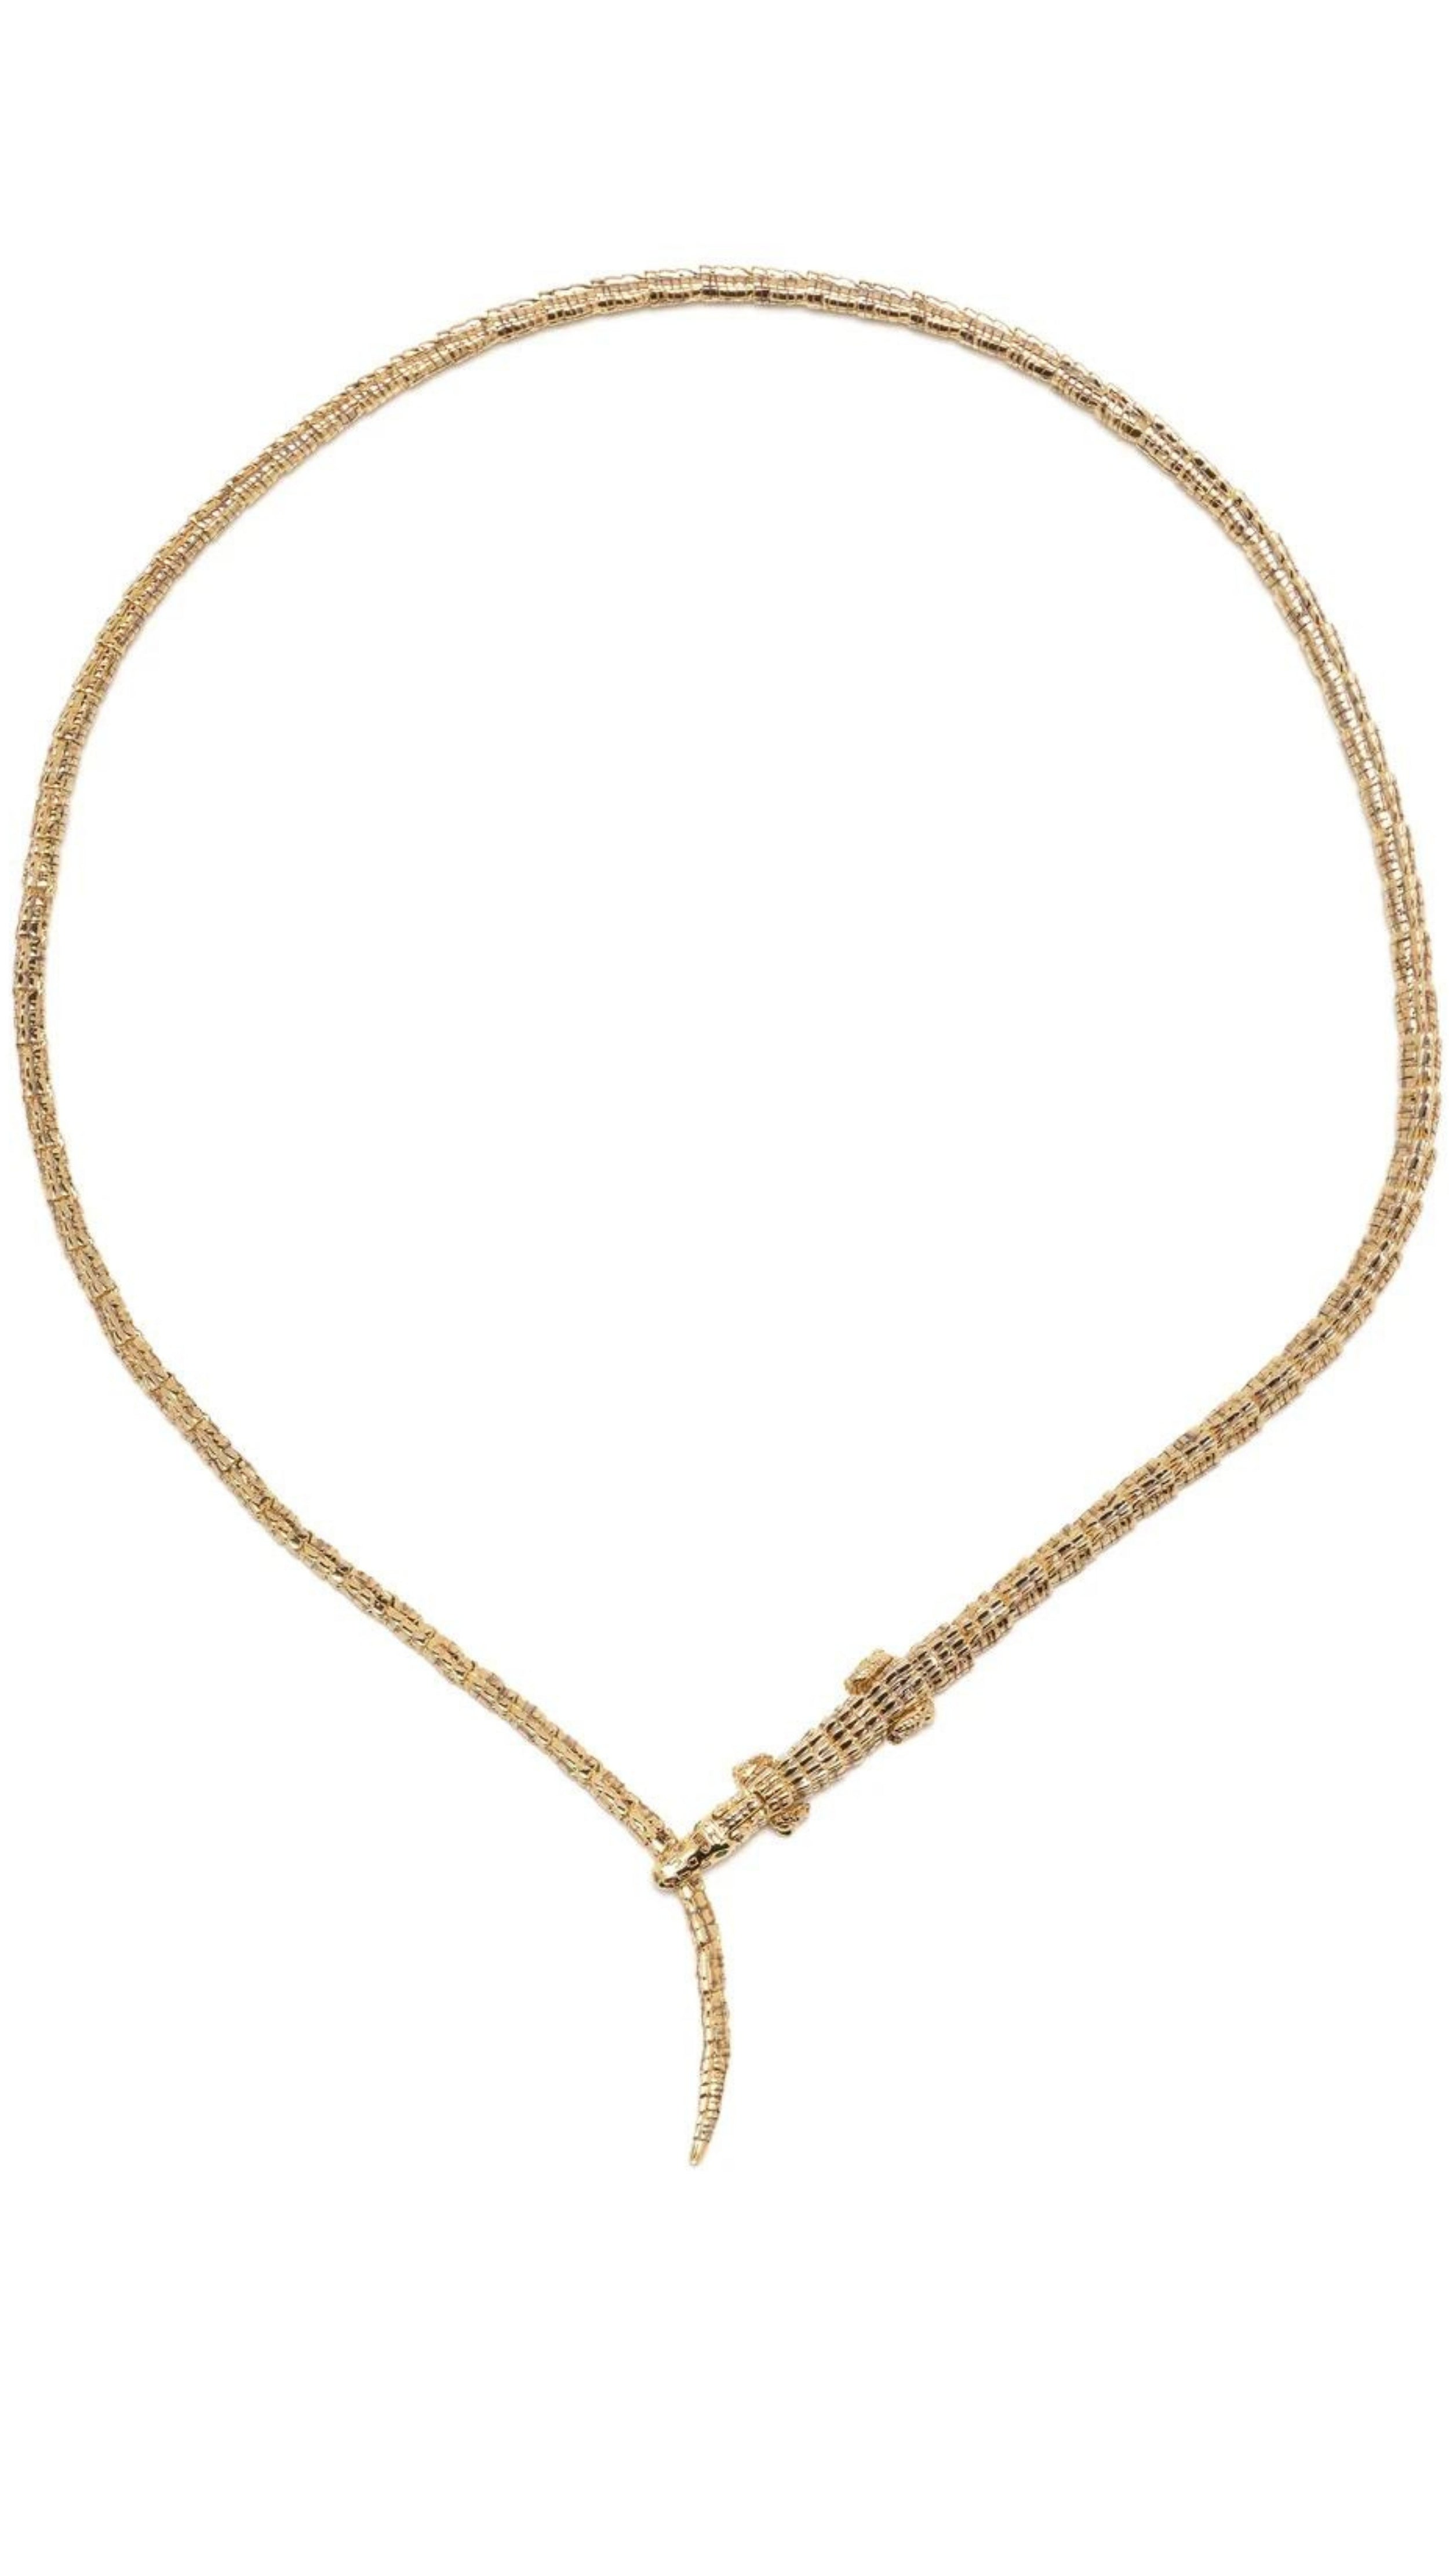 Bibi van der Velden The Alligator Wrap Thin Necklace made from 18k yellow gold in the shape of body of an alligator. Its elongated tail serves as the necklace&#39;s length and features a closure of the alligator&#39;s jaws snapping down on its own tail in the front. This necklace has  tsavorite eyes and moving feet. Shown from the top.